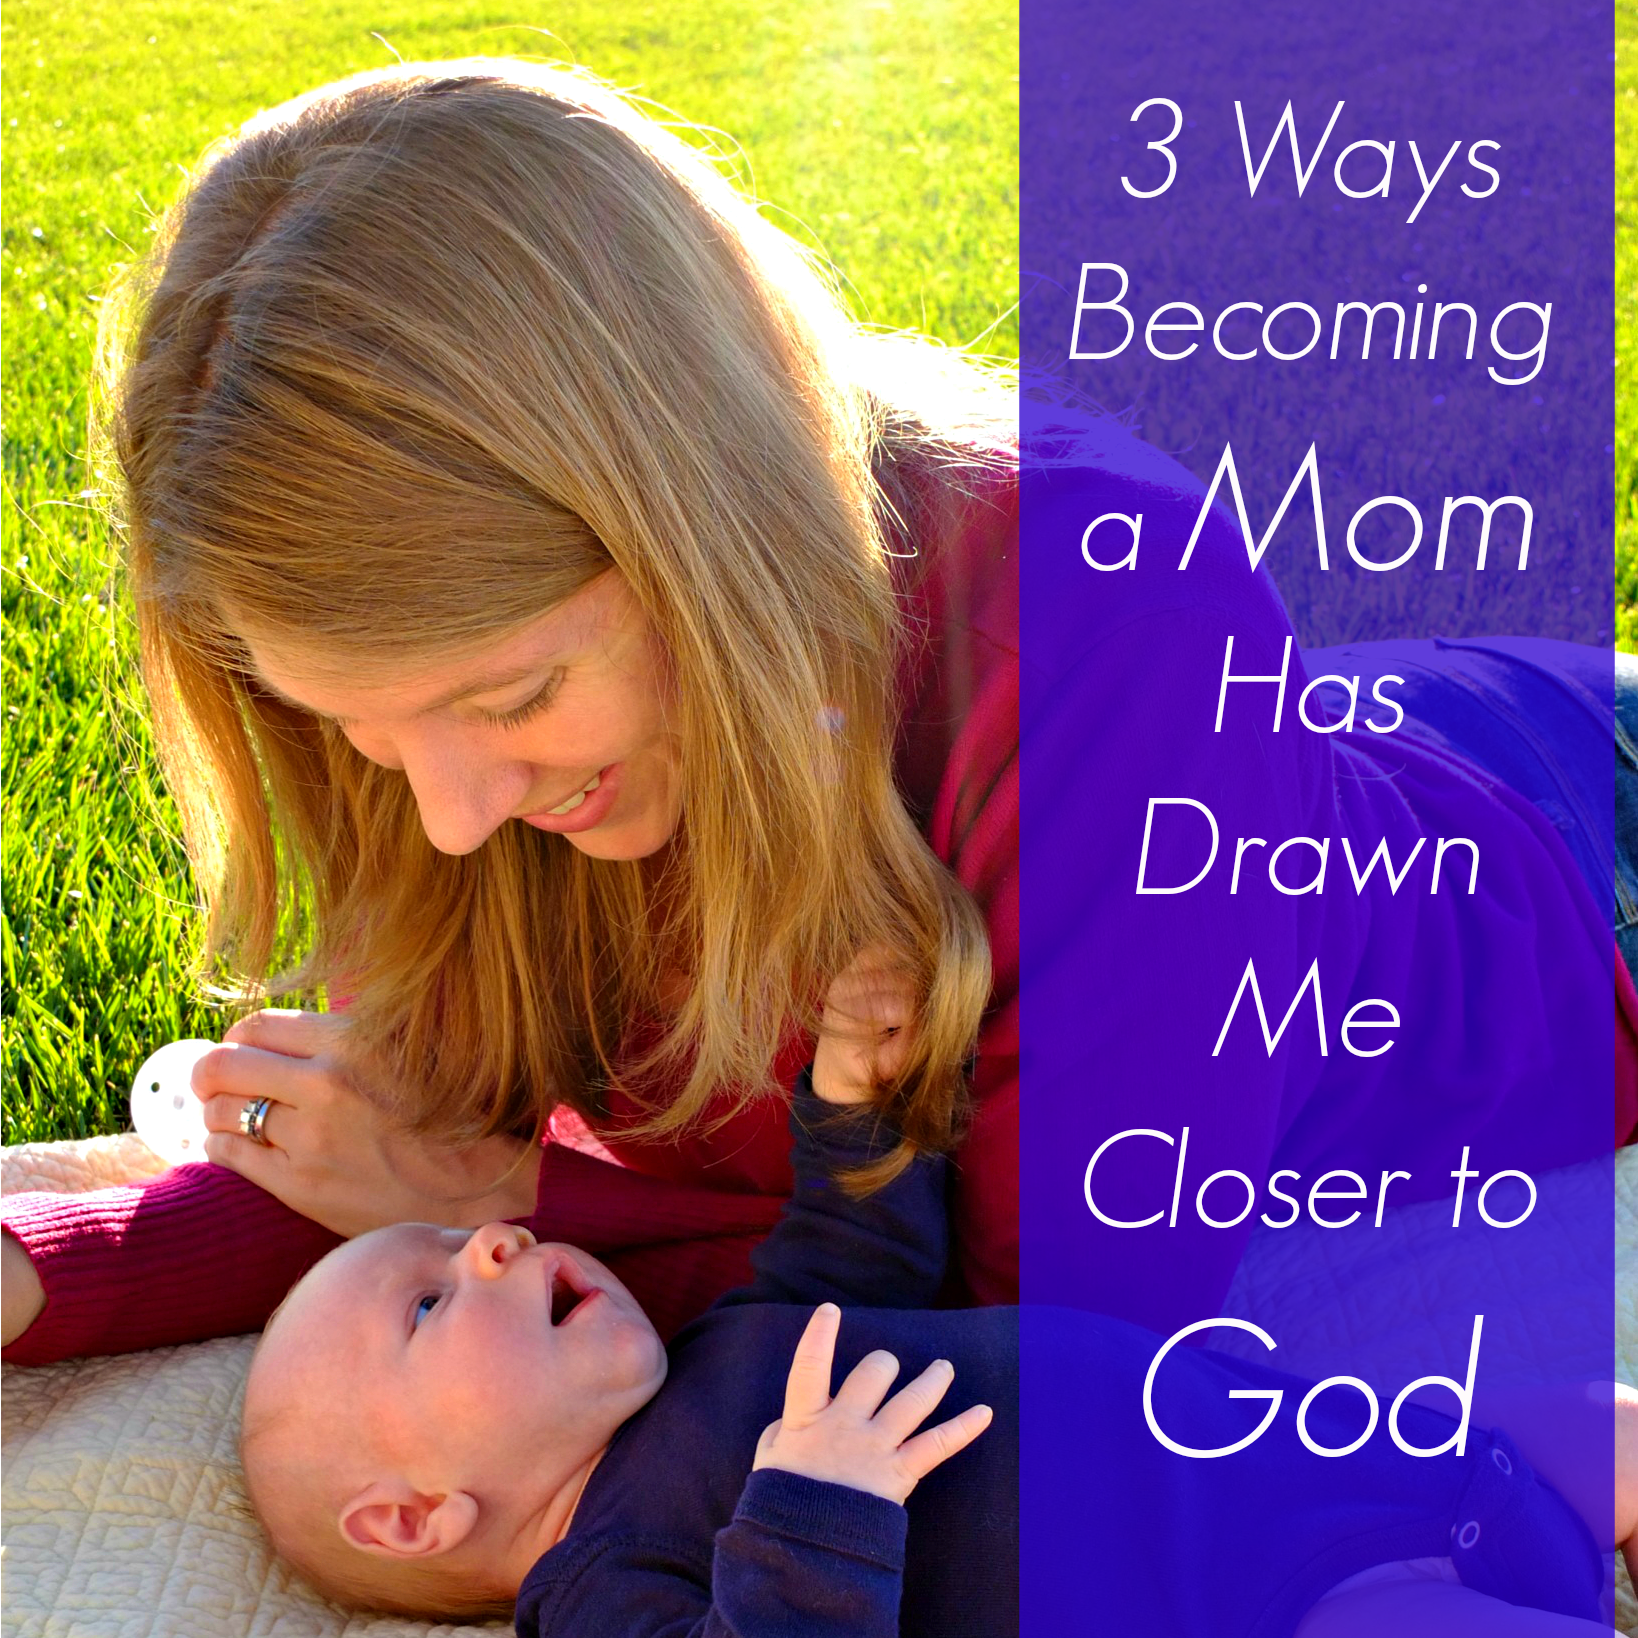 3 Ways Becoming a Mom Has Drawn Me Closer to God